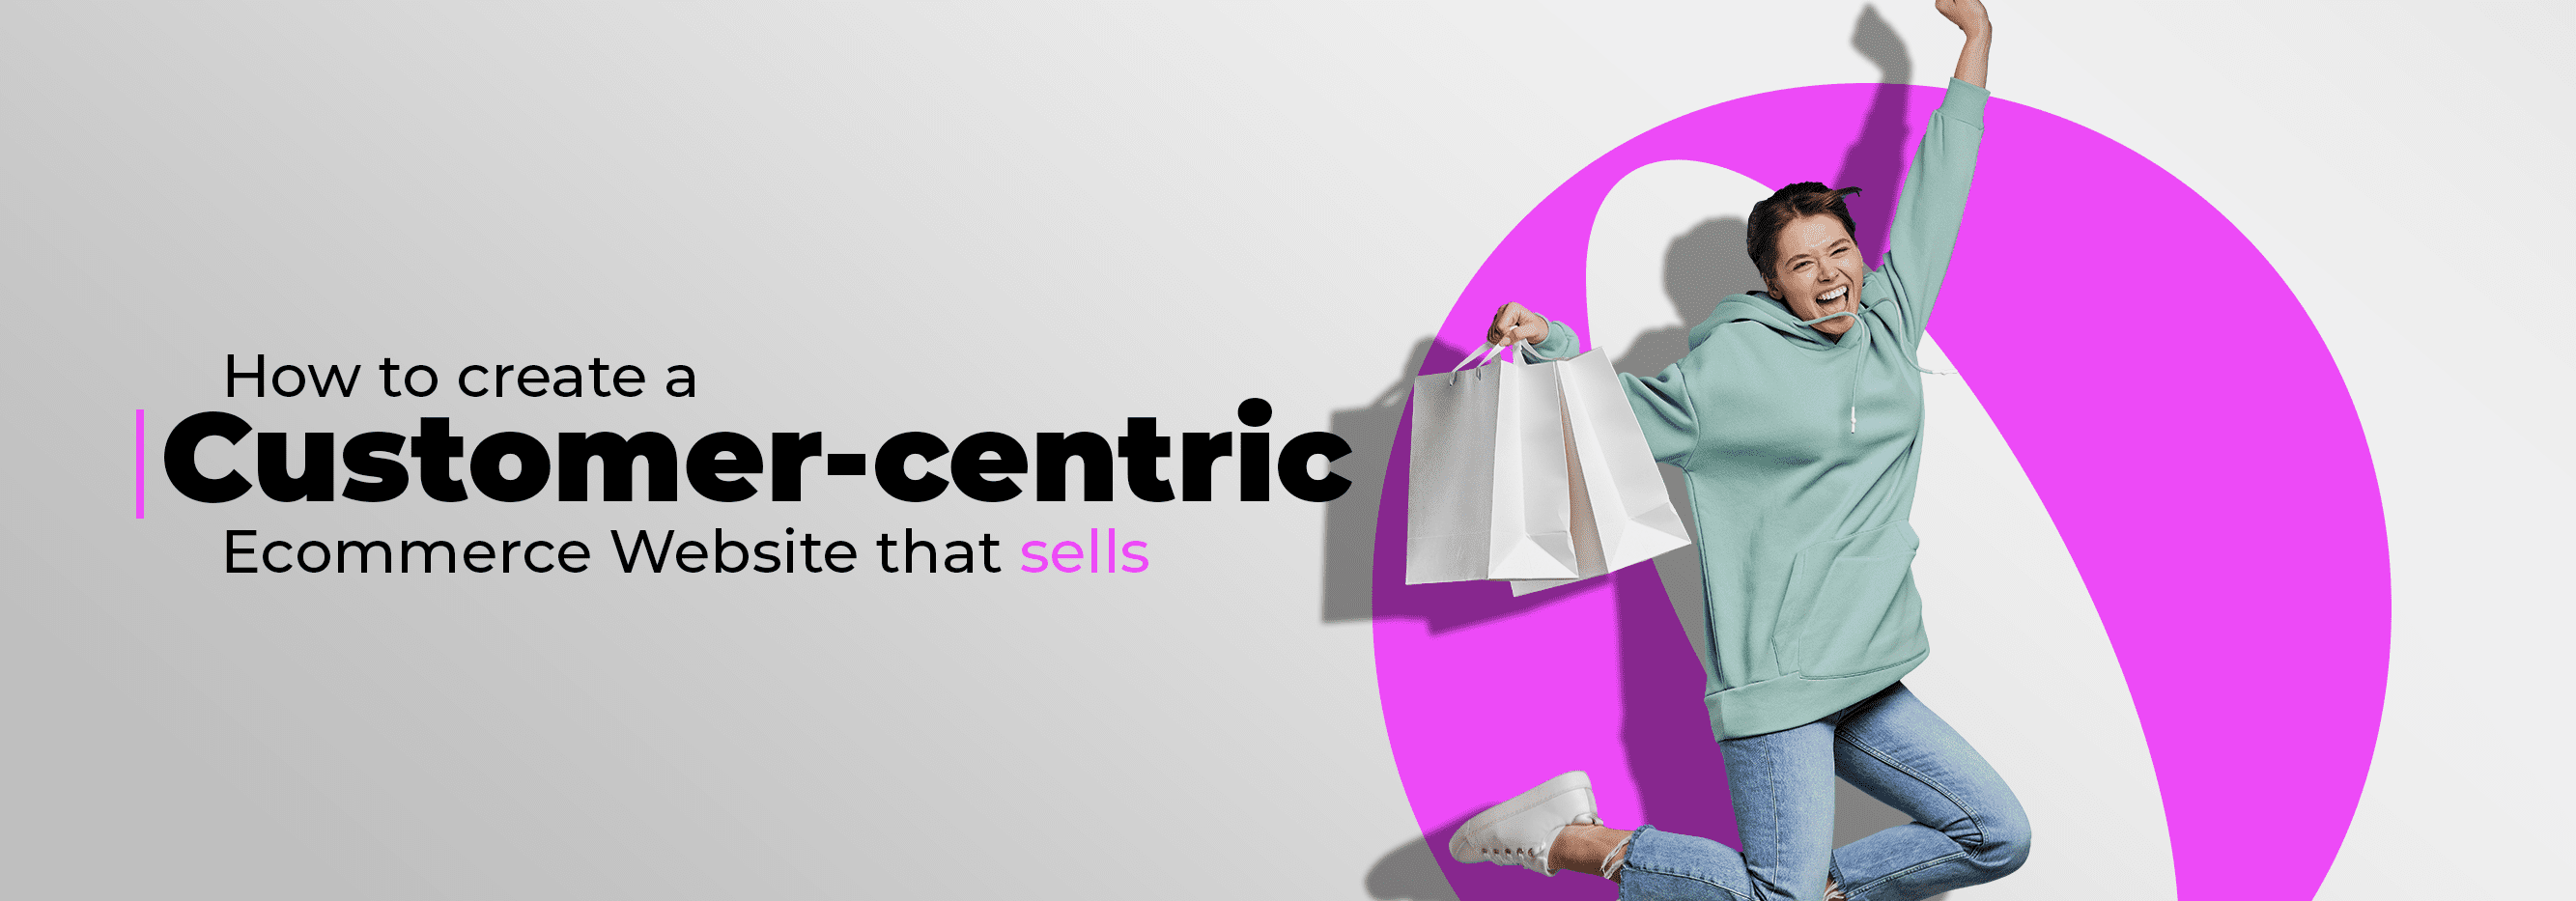 How to create a customer-centric ecommerce website that sells_banner